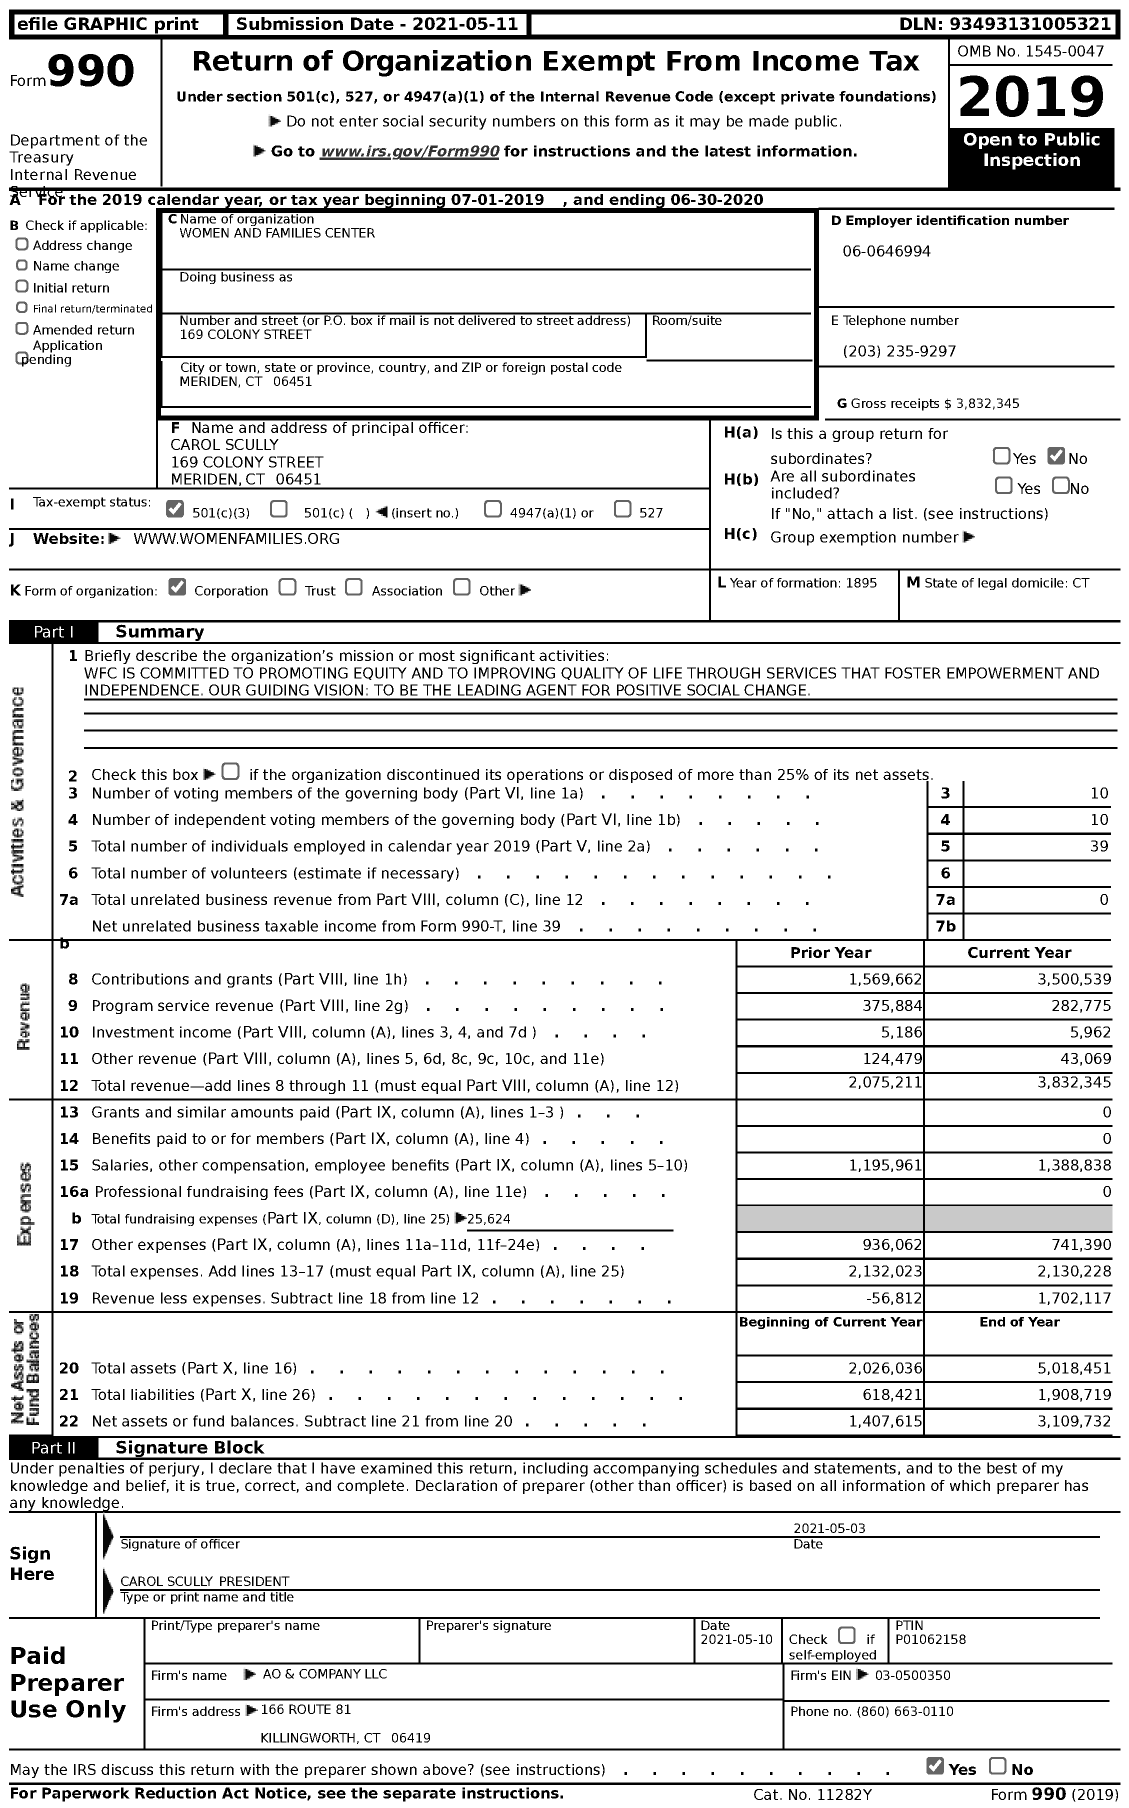 Image of first page of 2019 Form 990 for Women and Families Center (WFC)